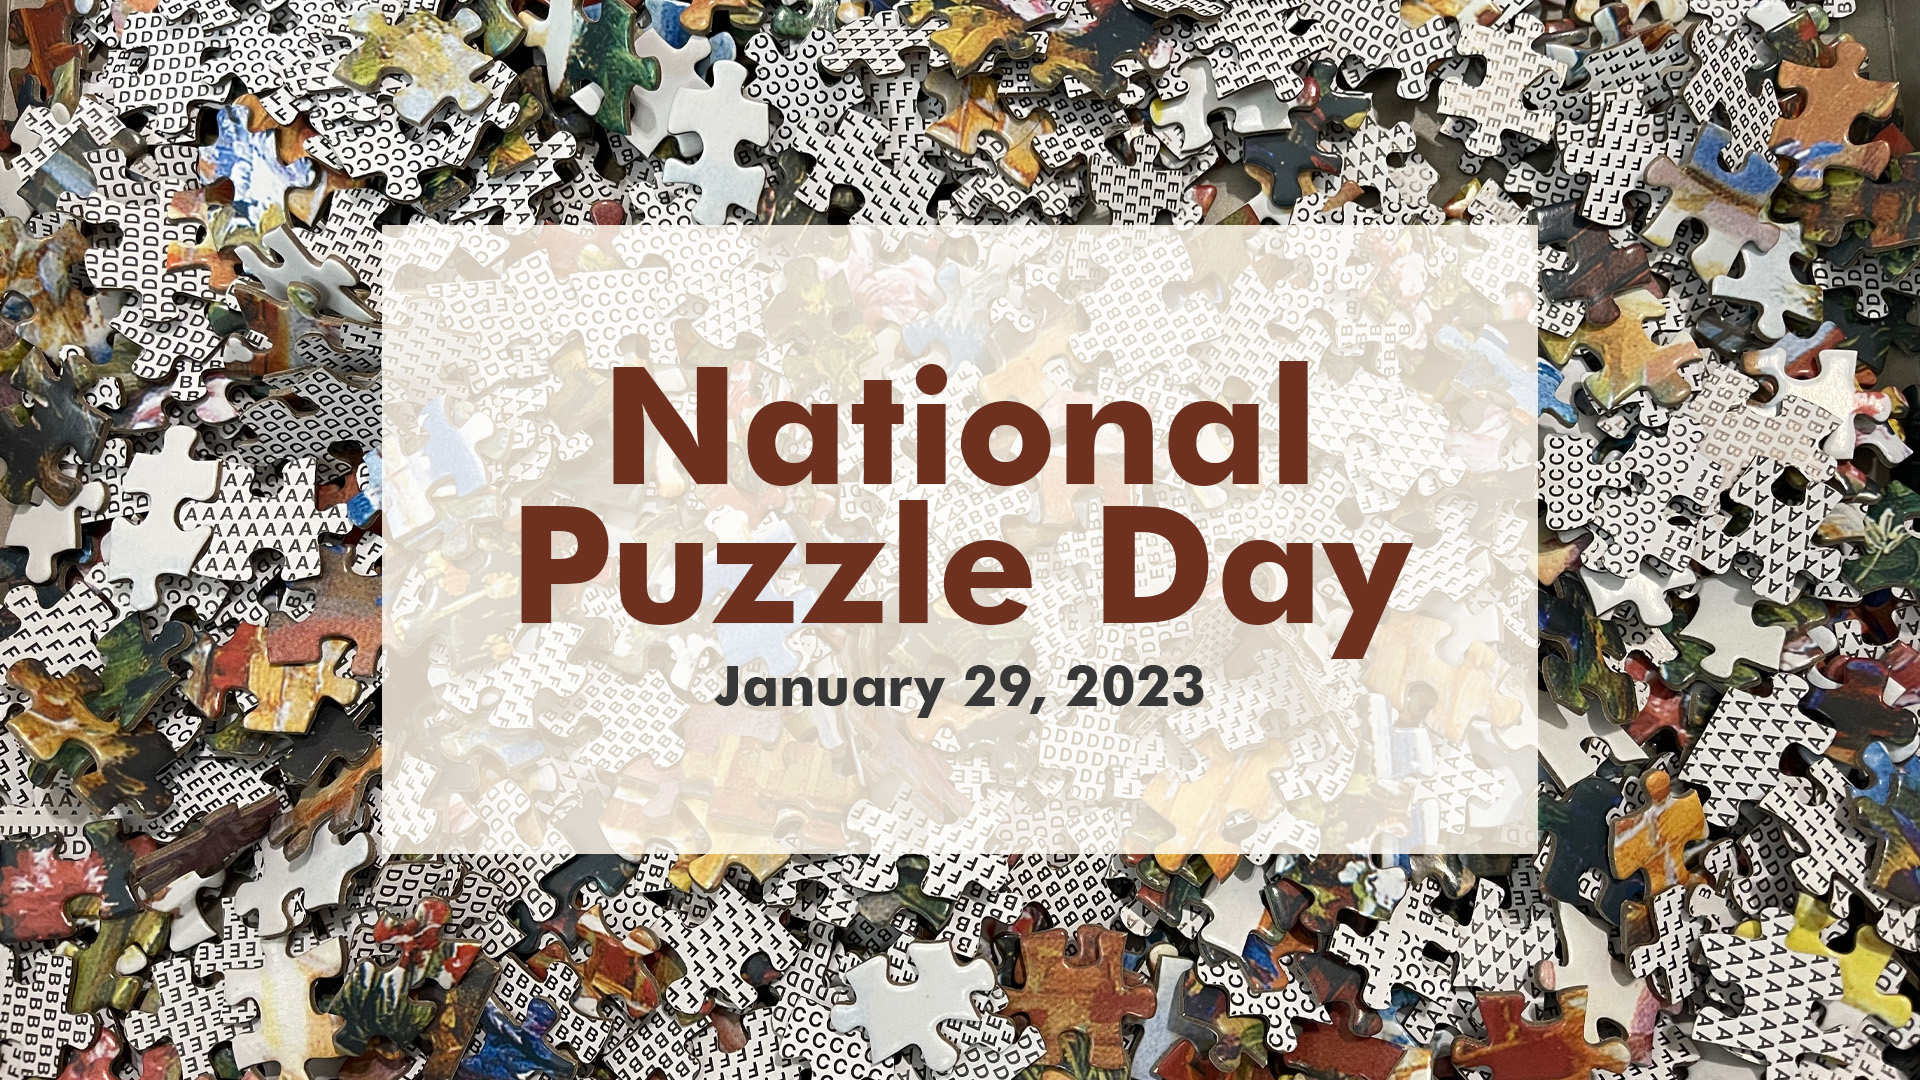 There is a photo of puzzle pieces overlapping each other laying on a table. In the middle of the graphic there's a deep red text that reads, "National Puzzle Day January 29, 2023".